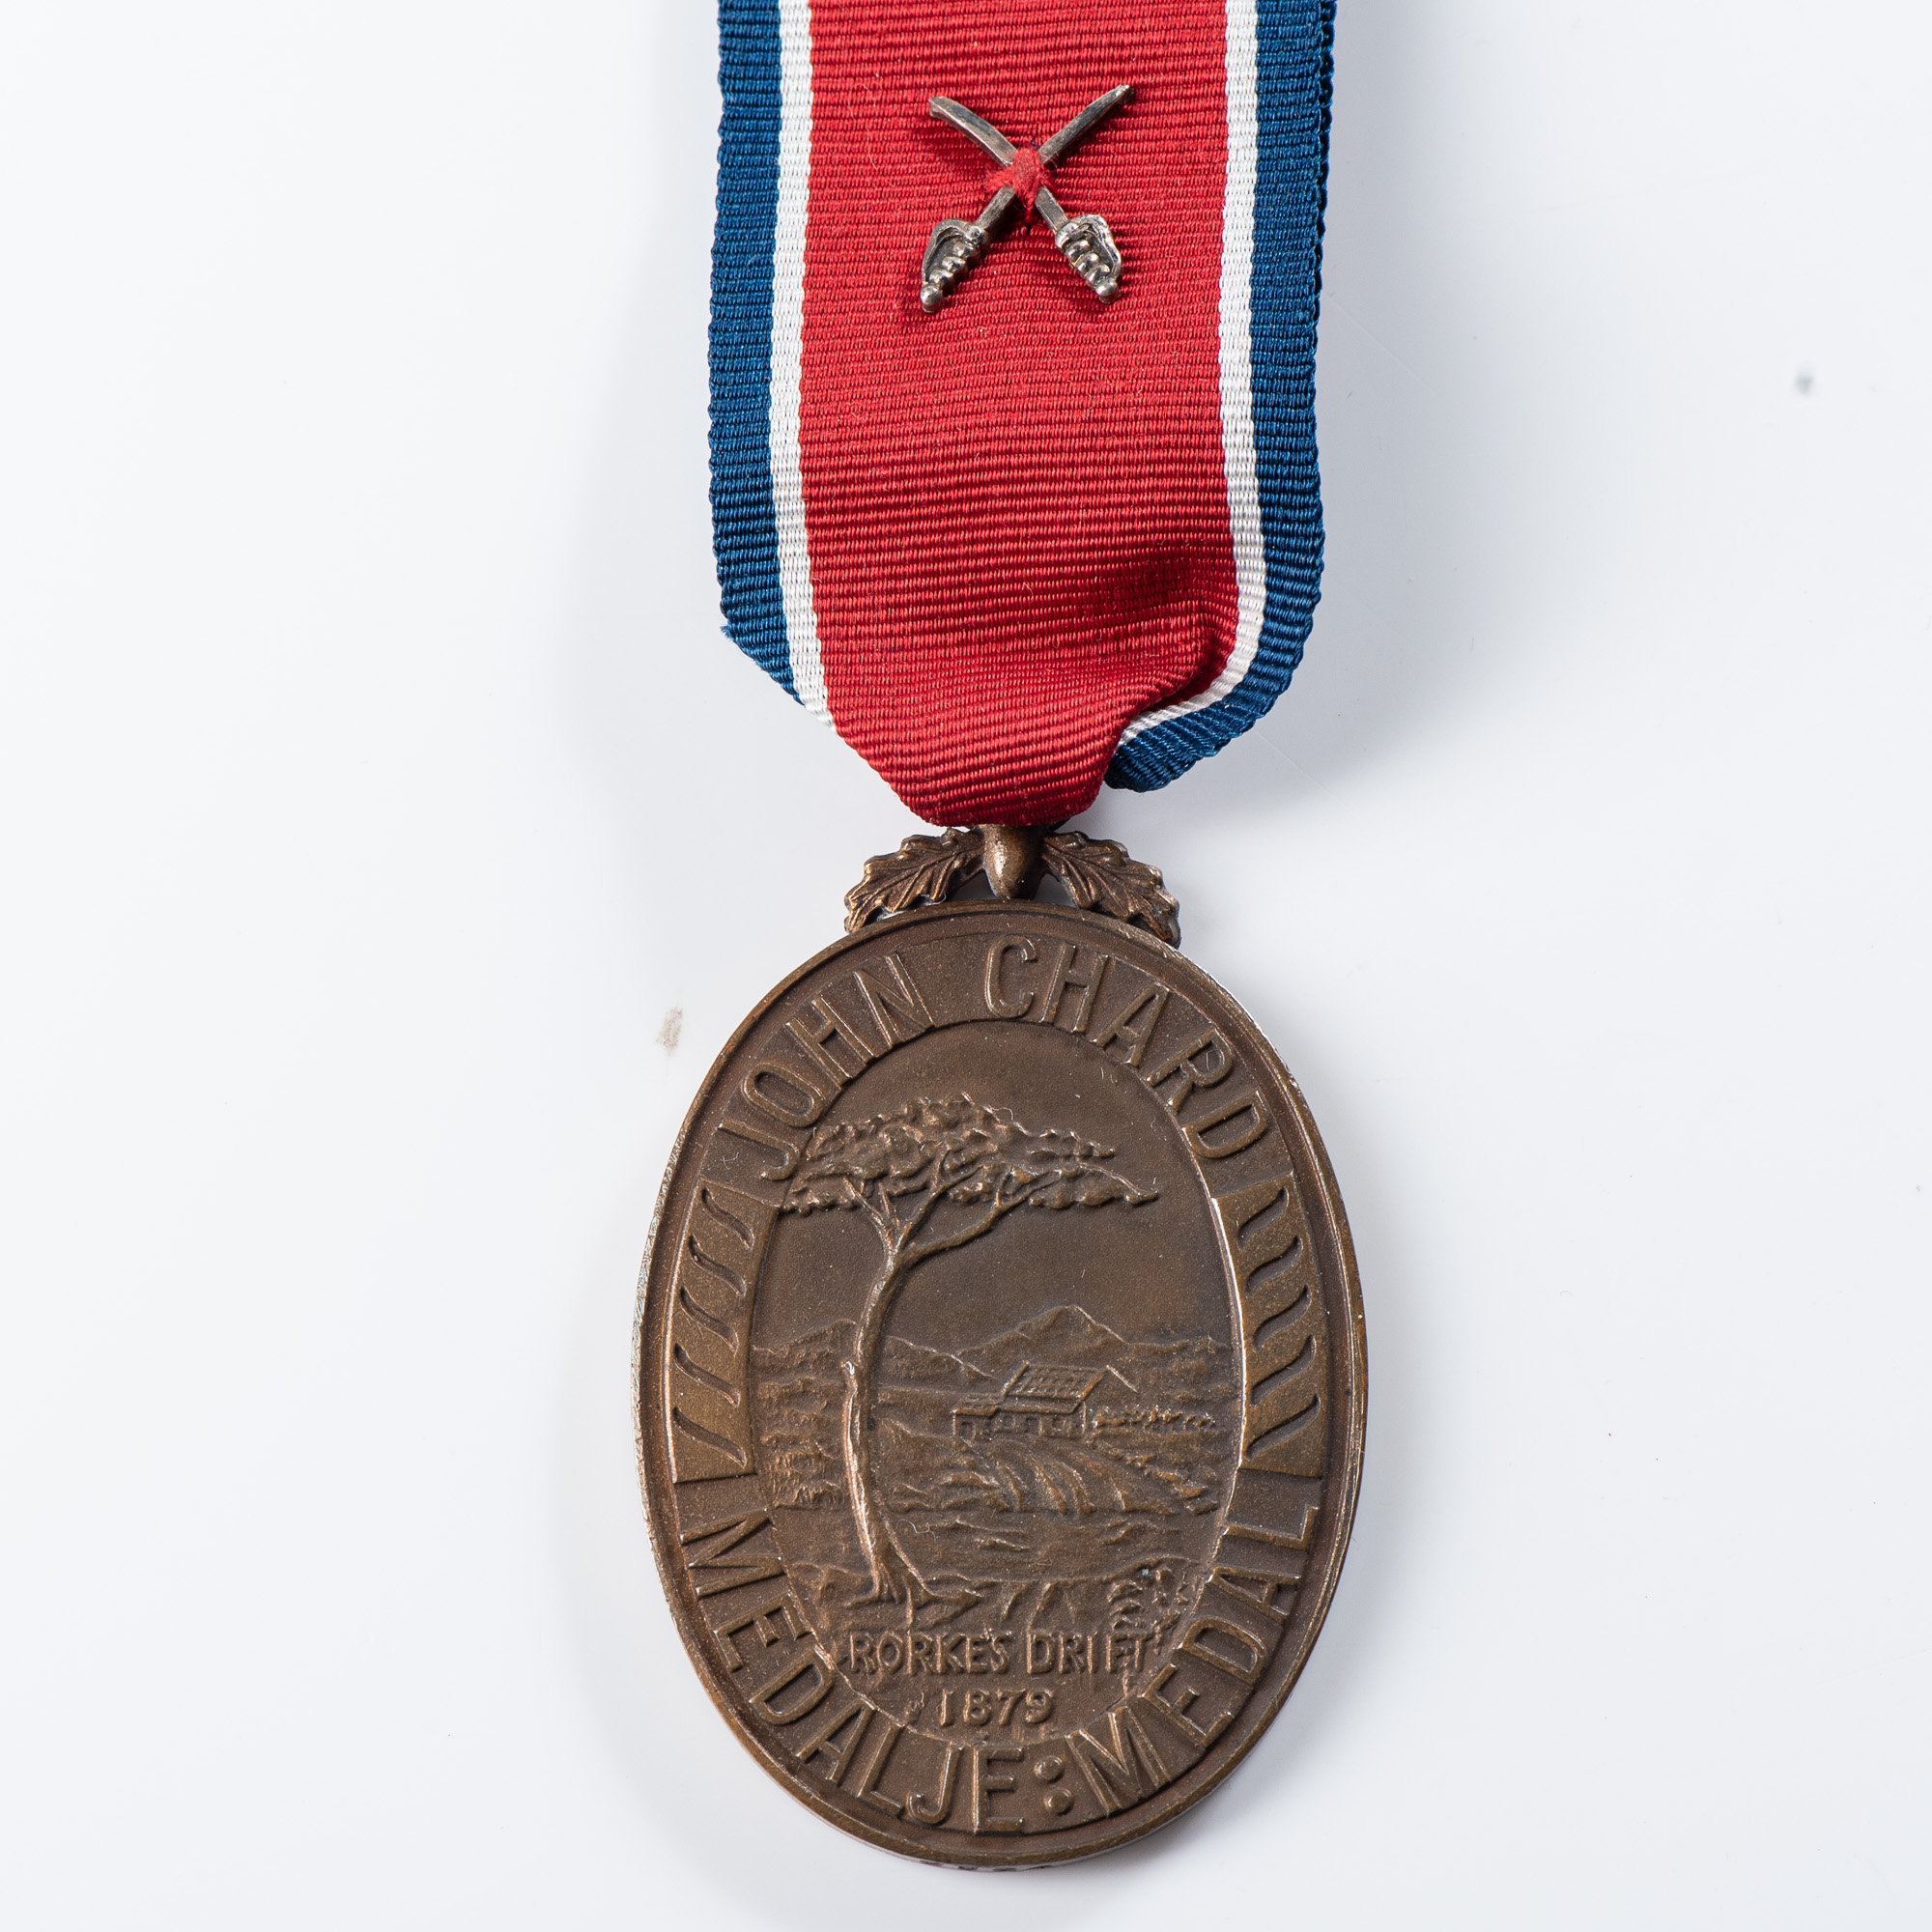 JOHN CHARD MEDAL (REPUBLIC ISSUE COAT OF ARMS) - Image 3 of 5